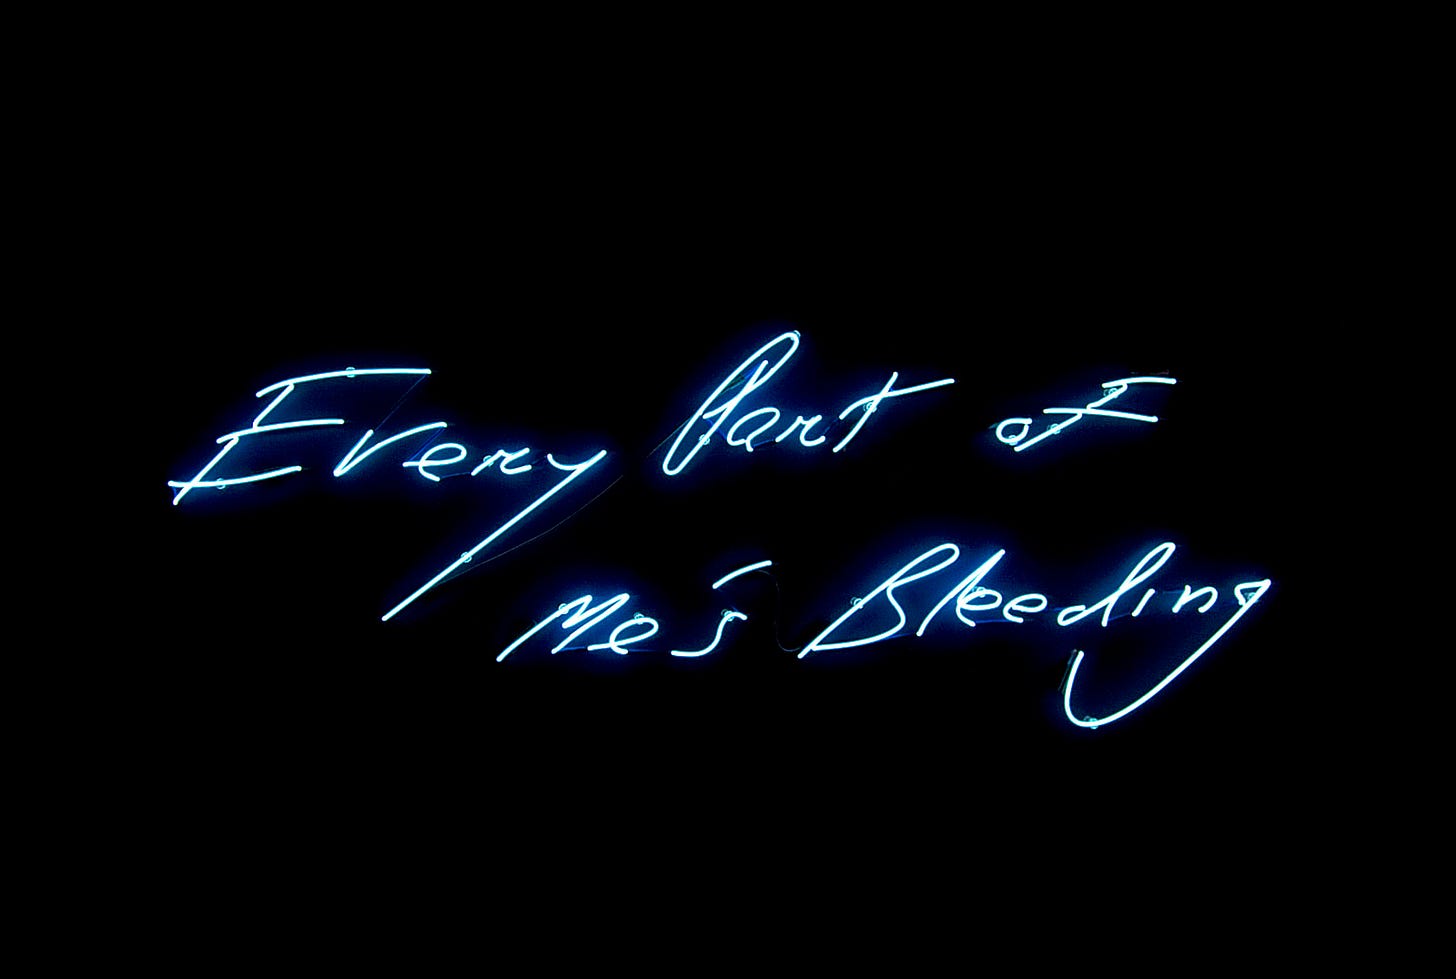 Tracey Emin, Every Part of Me's Bleeding, 1999 | White Cube